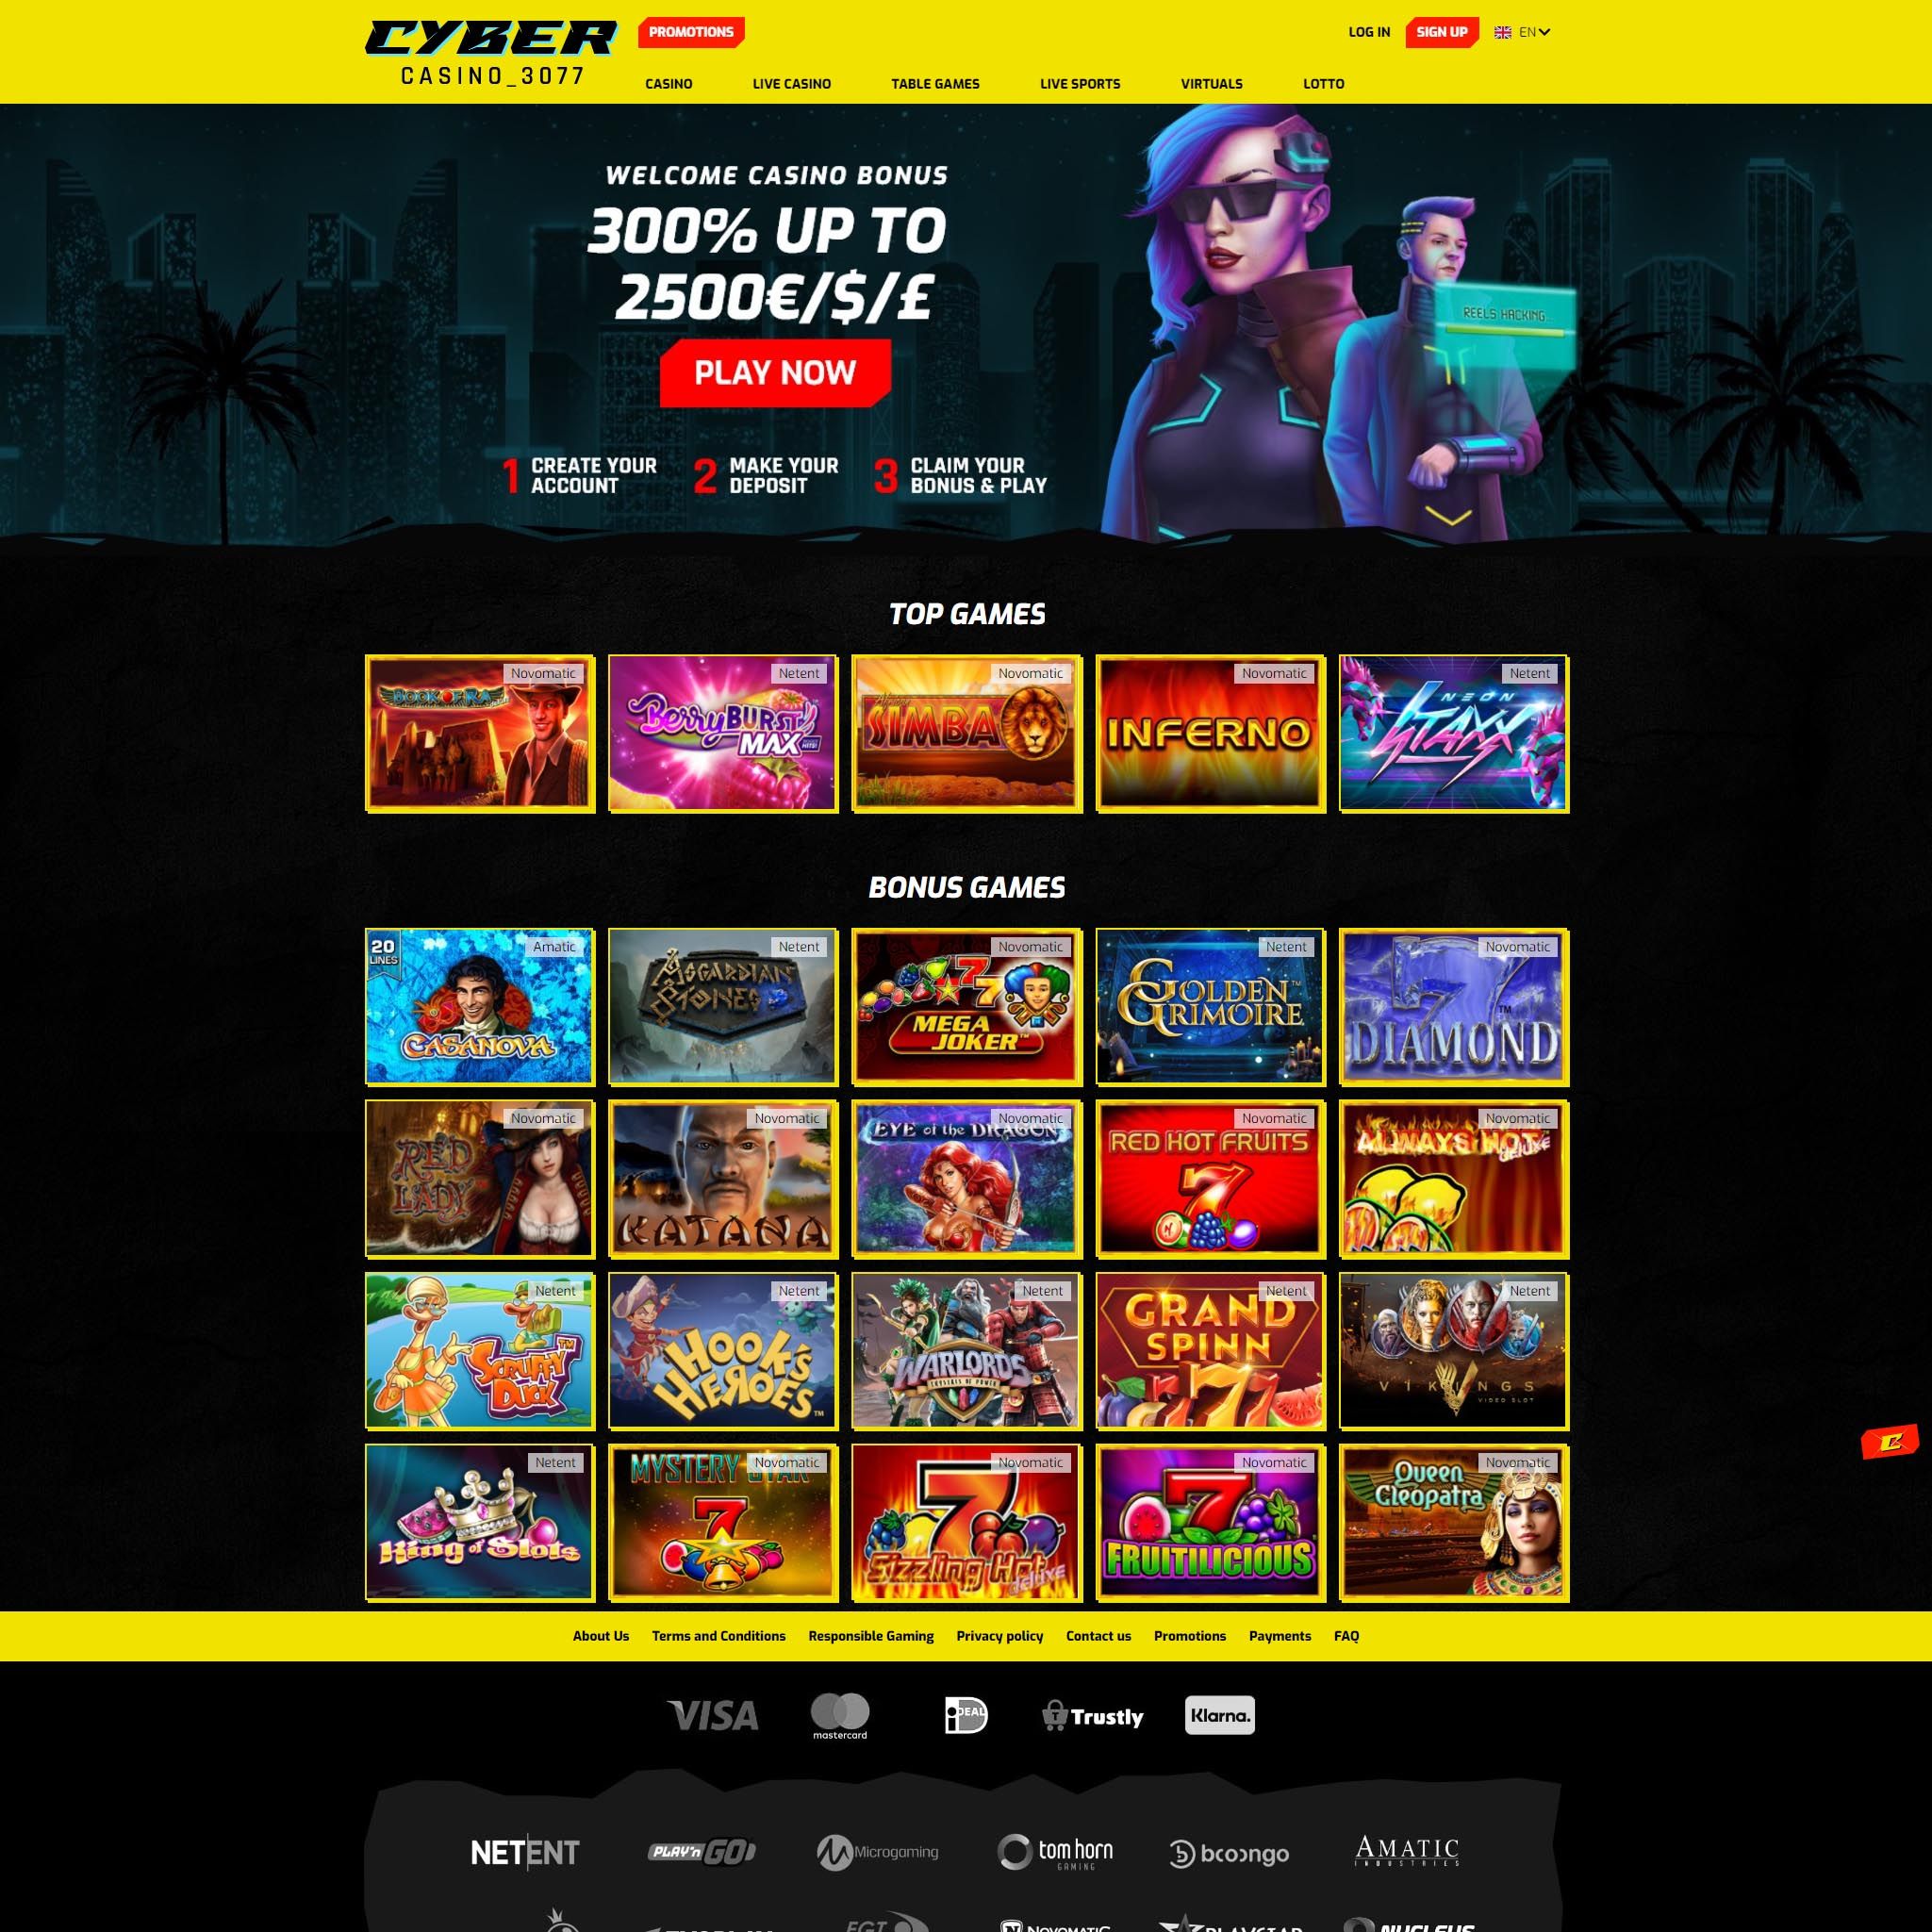 CyberCasino 3077 review by Mr. Gamble